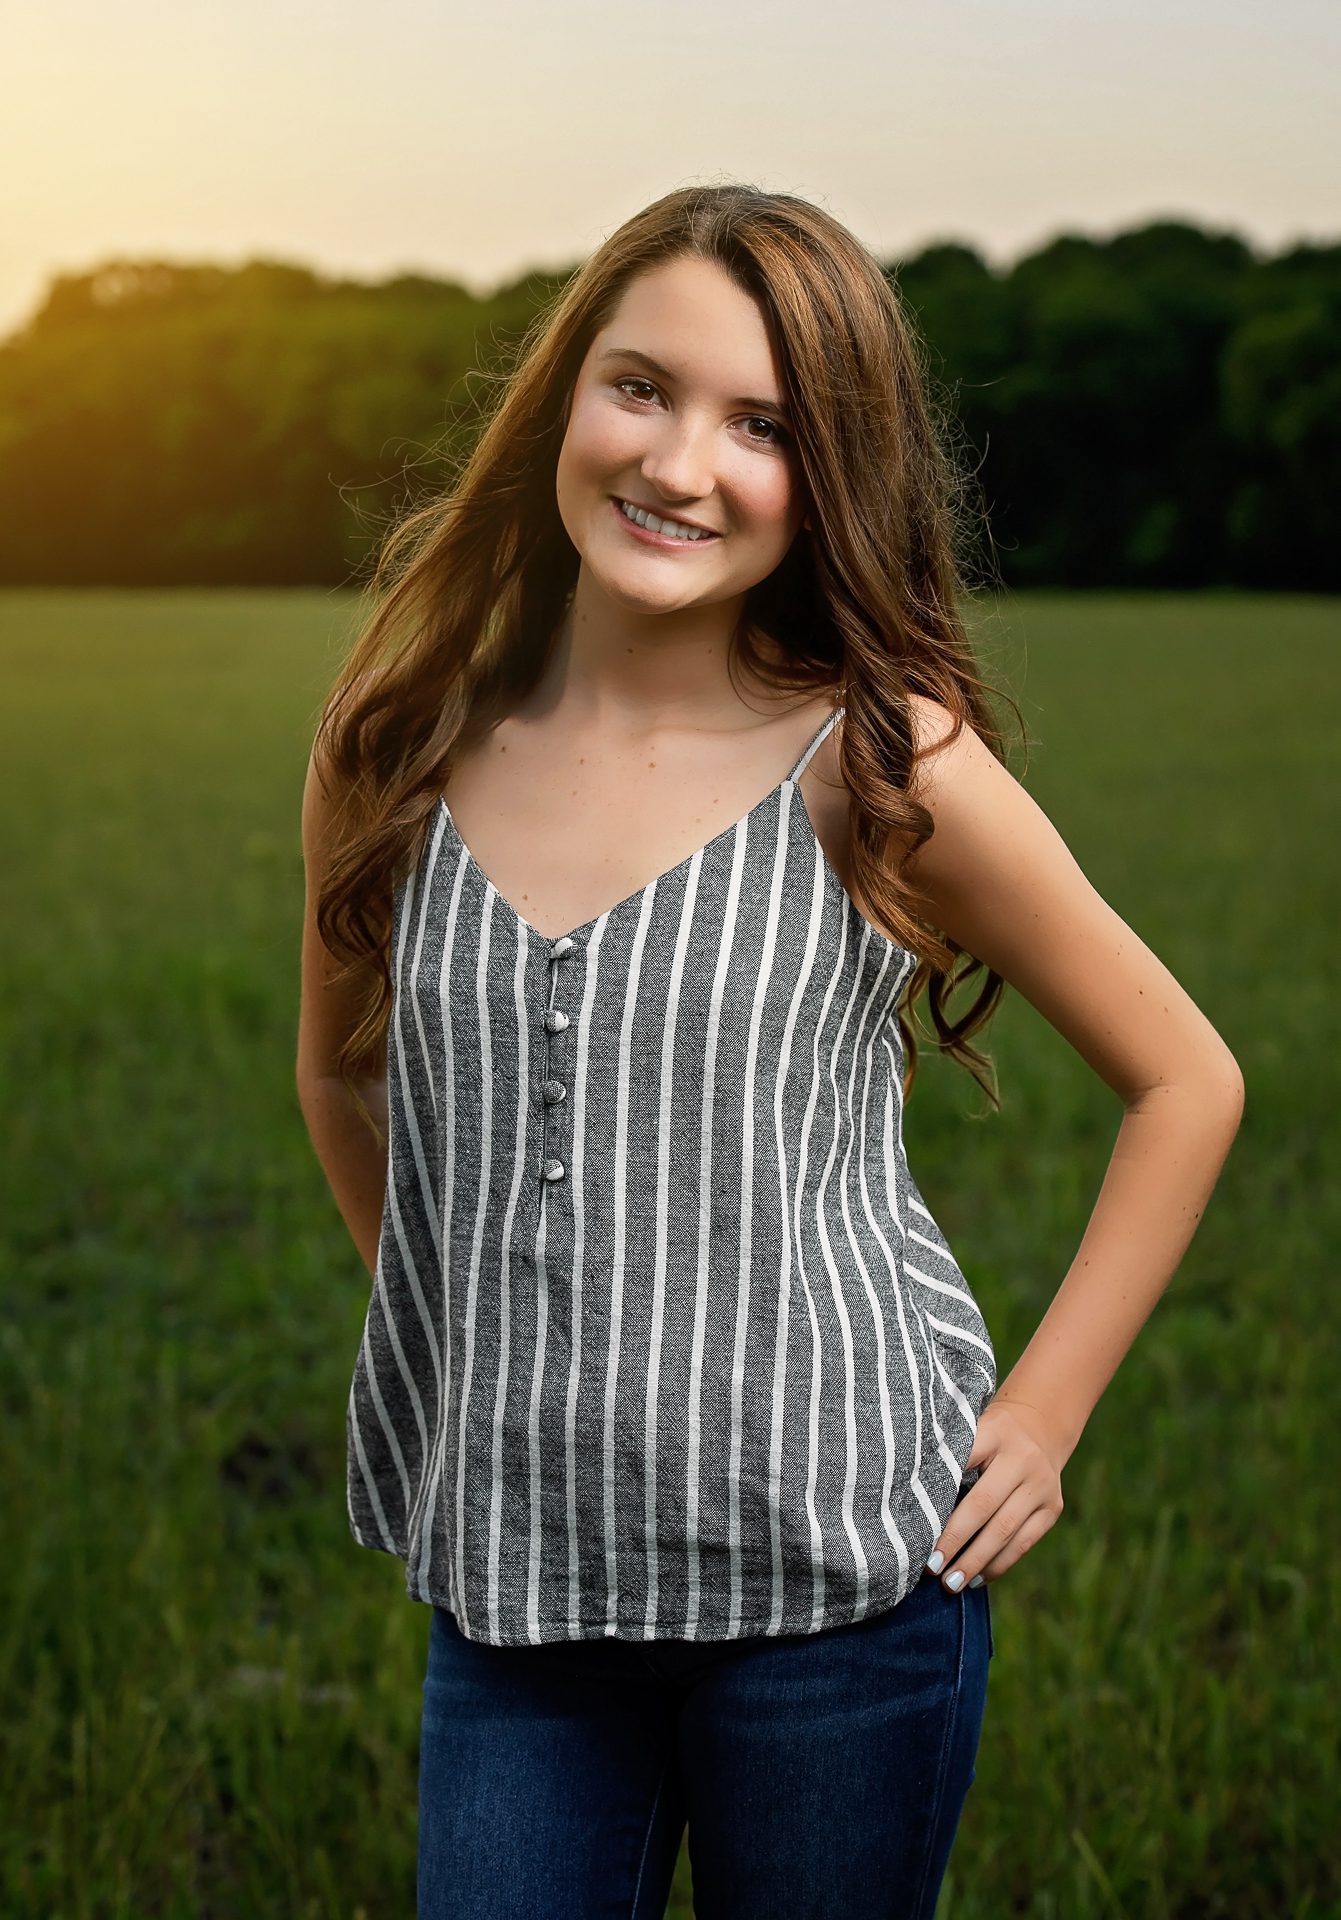 Children’s photography for a teen - Natalie Roberson Photography